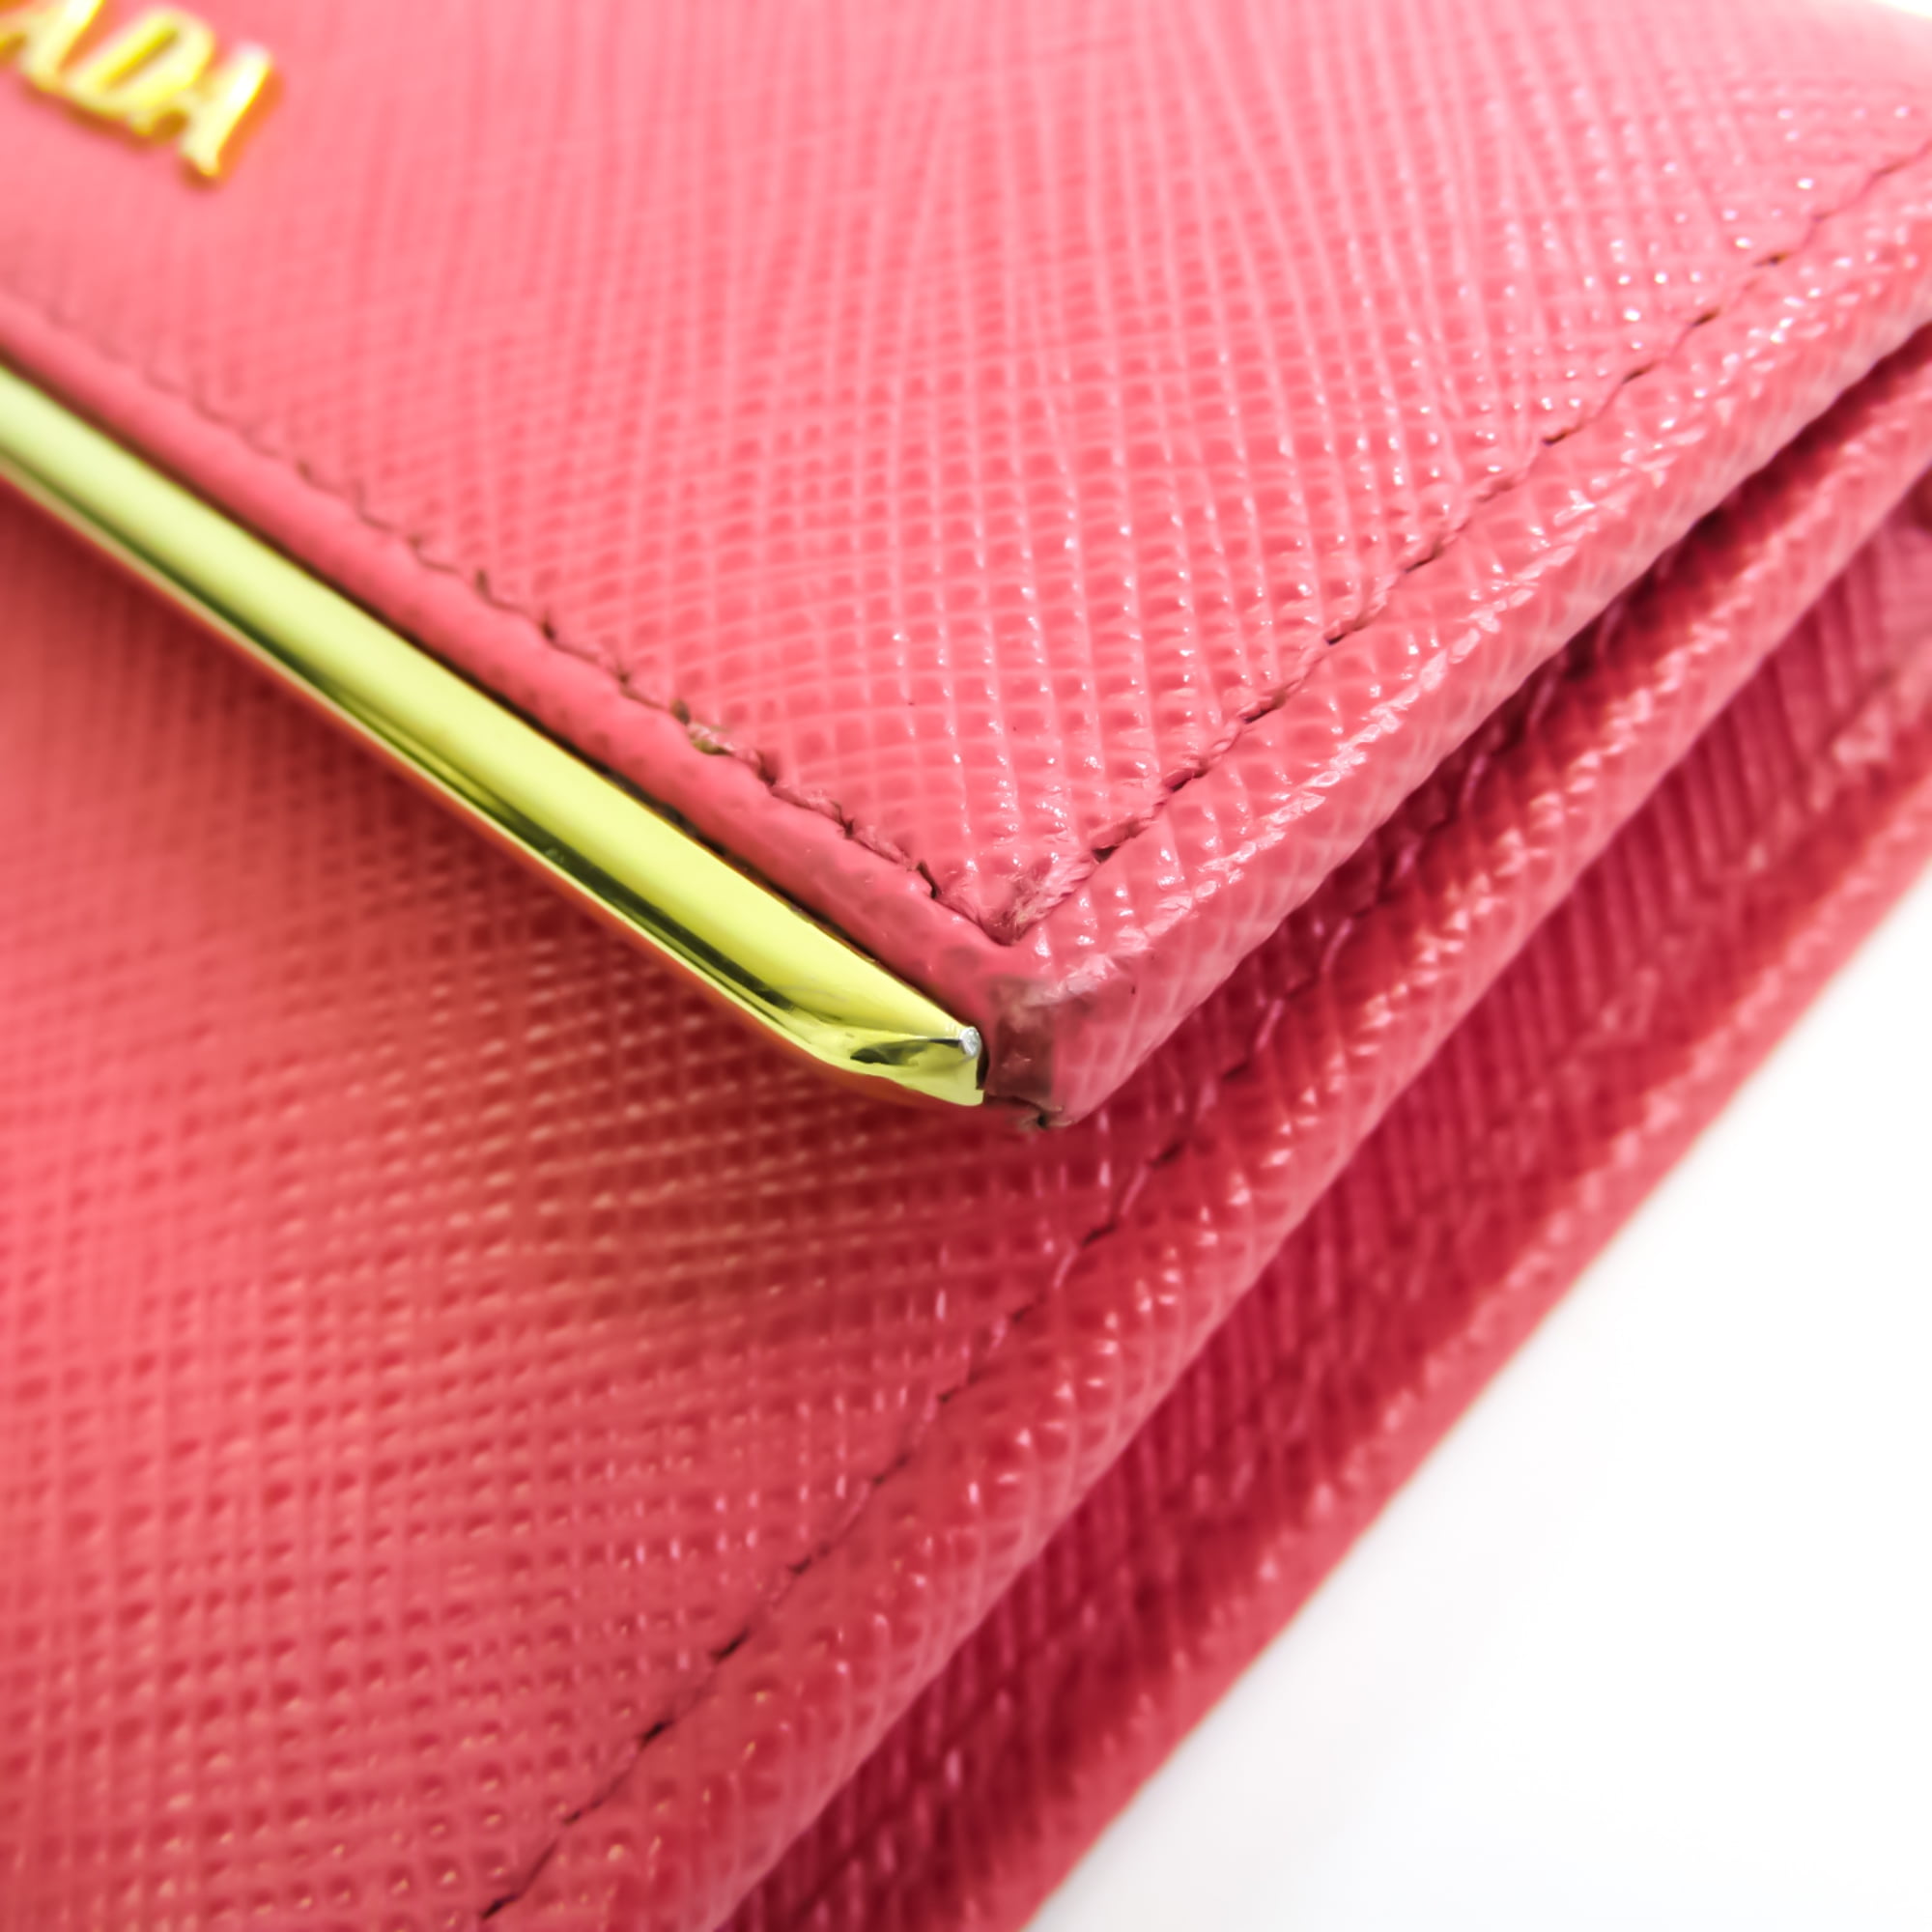 Prada - Authenticated Wallet - Leather Pink Plain for Women, Good Condition